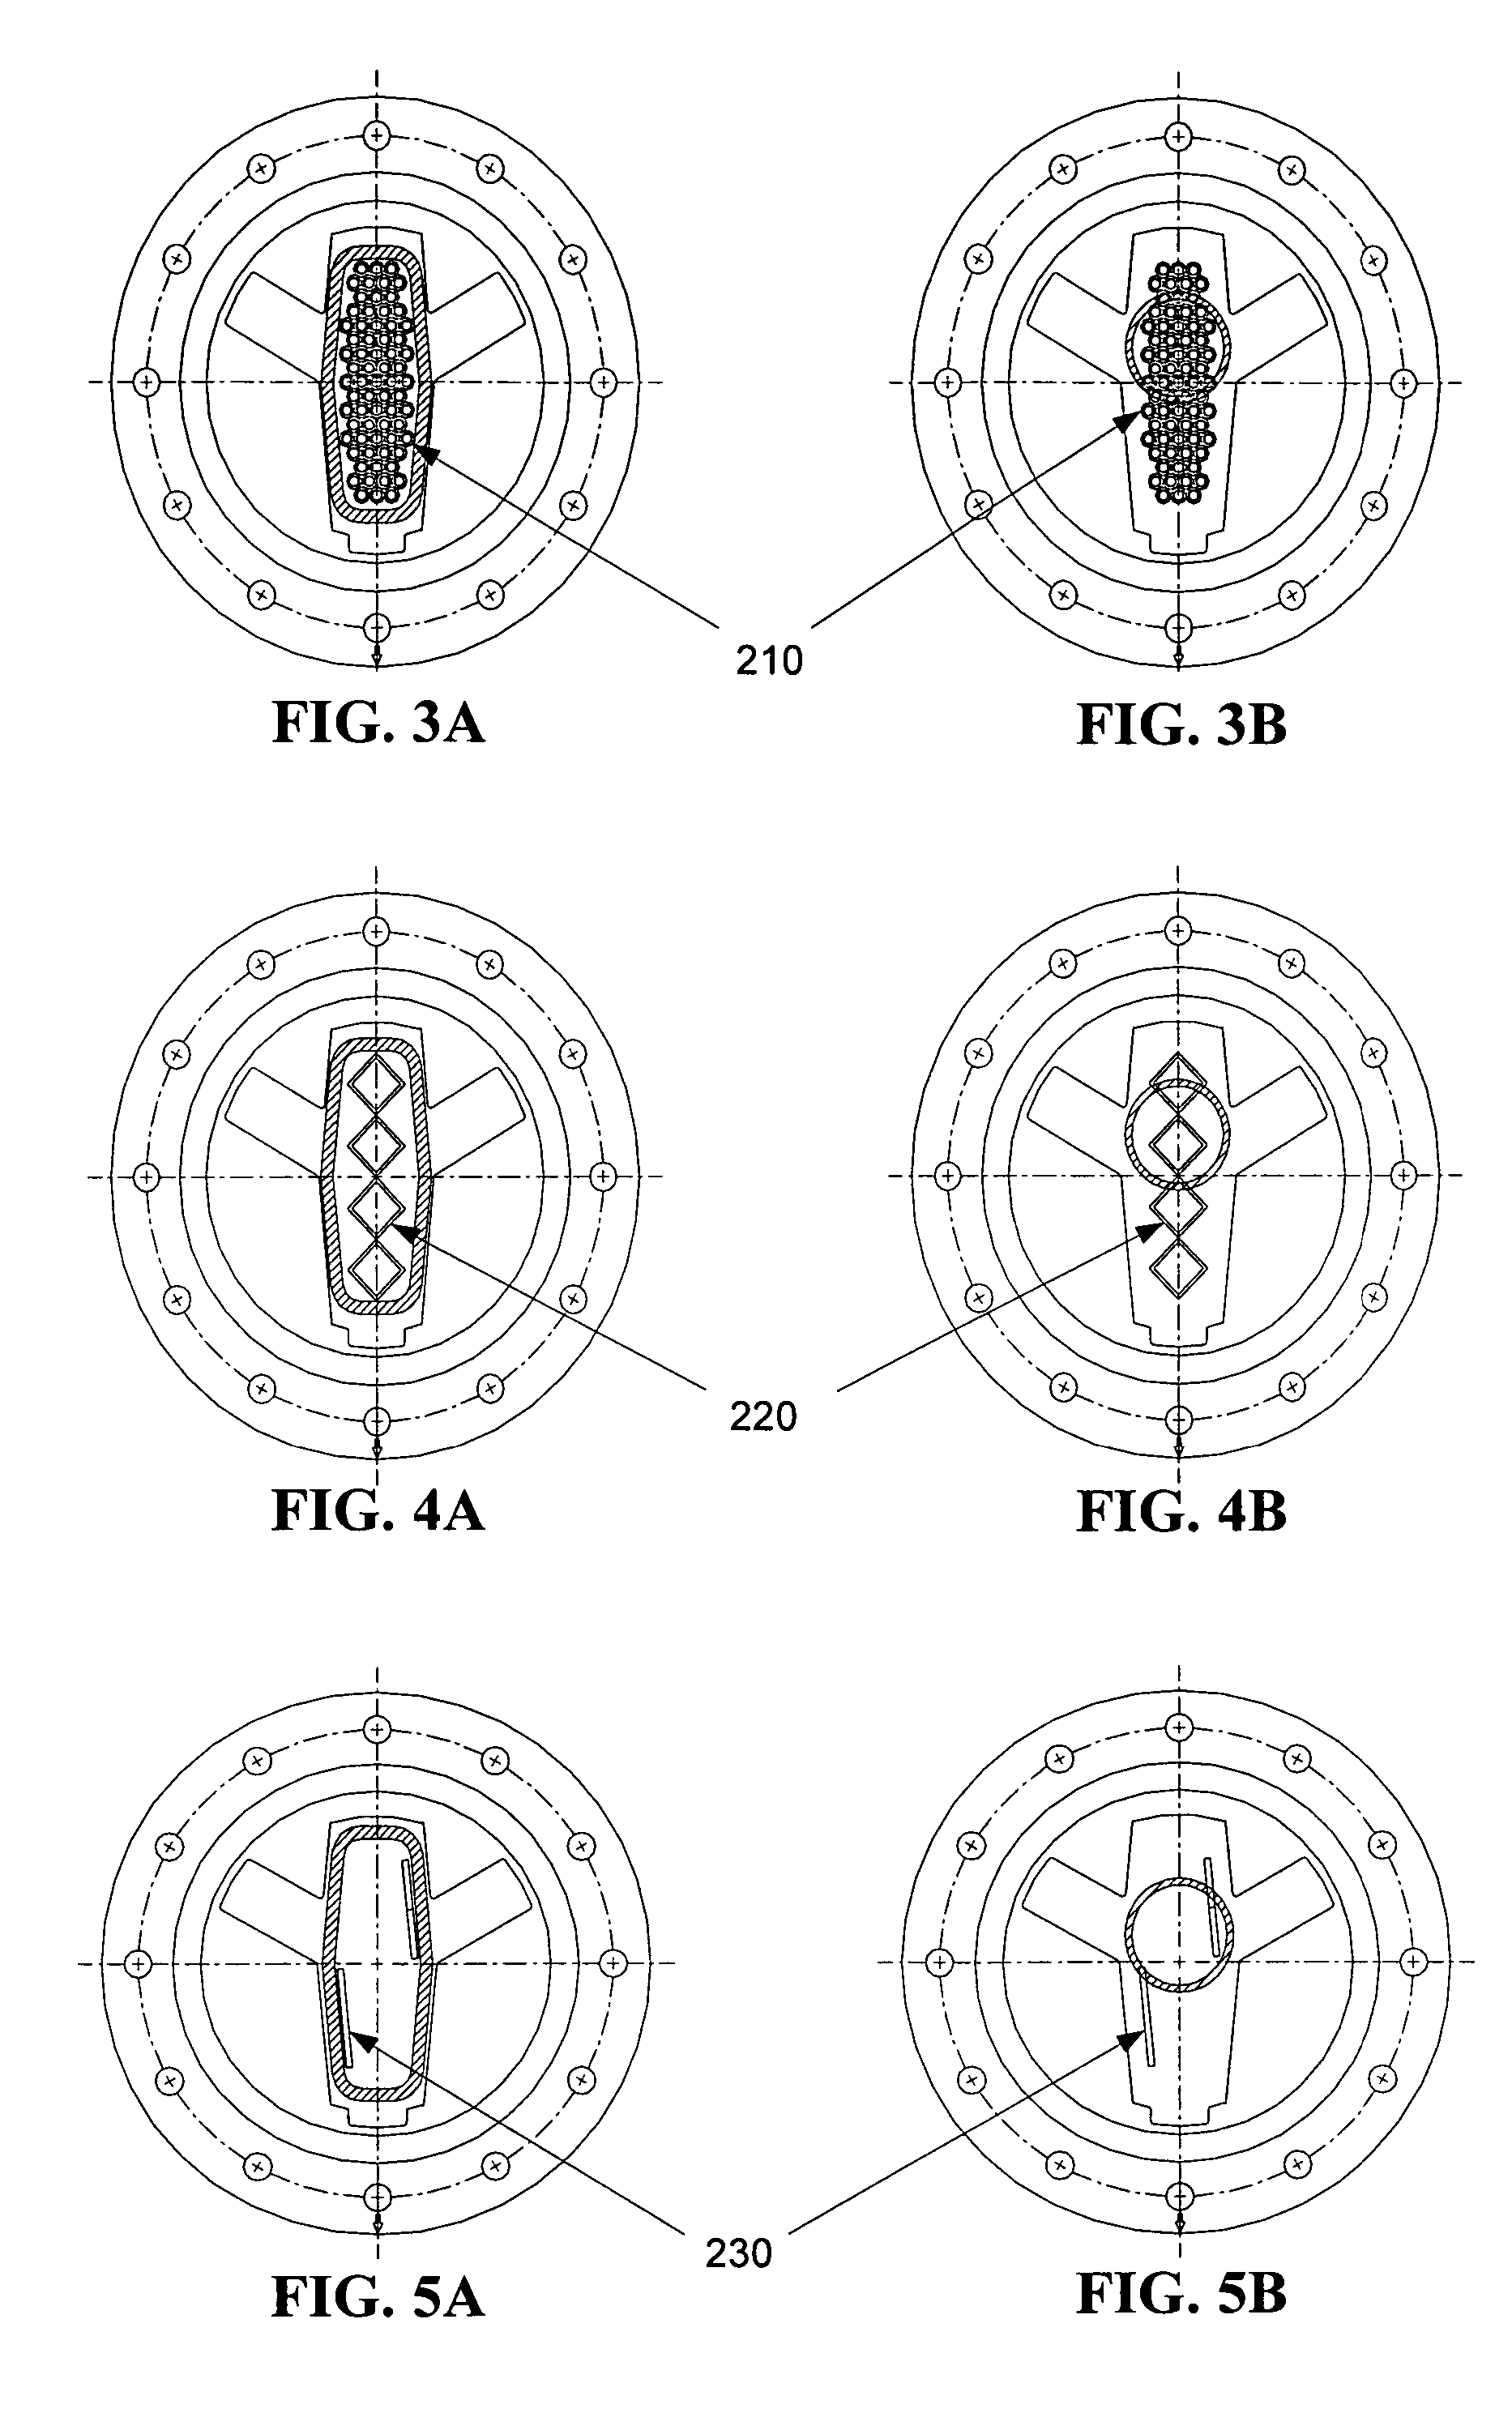 System and method for preventing incorrect aircraft fuel usage